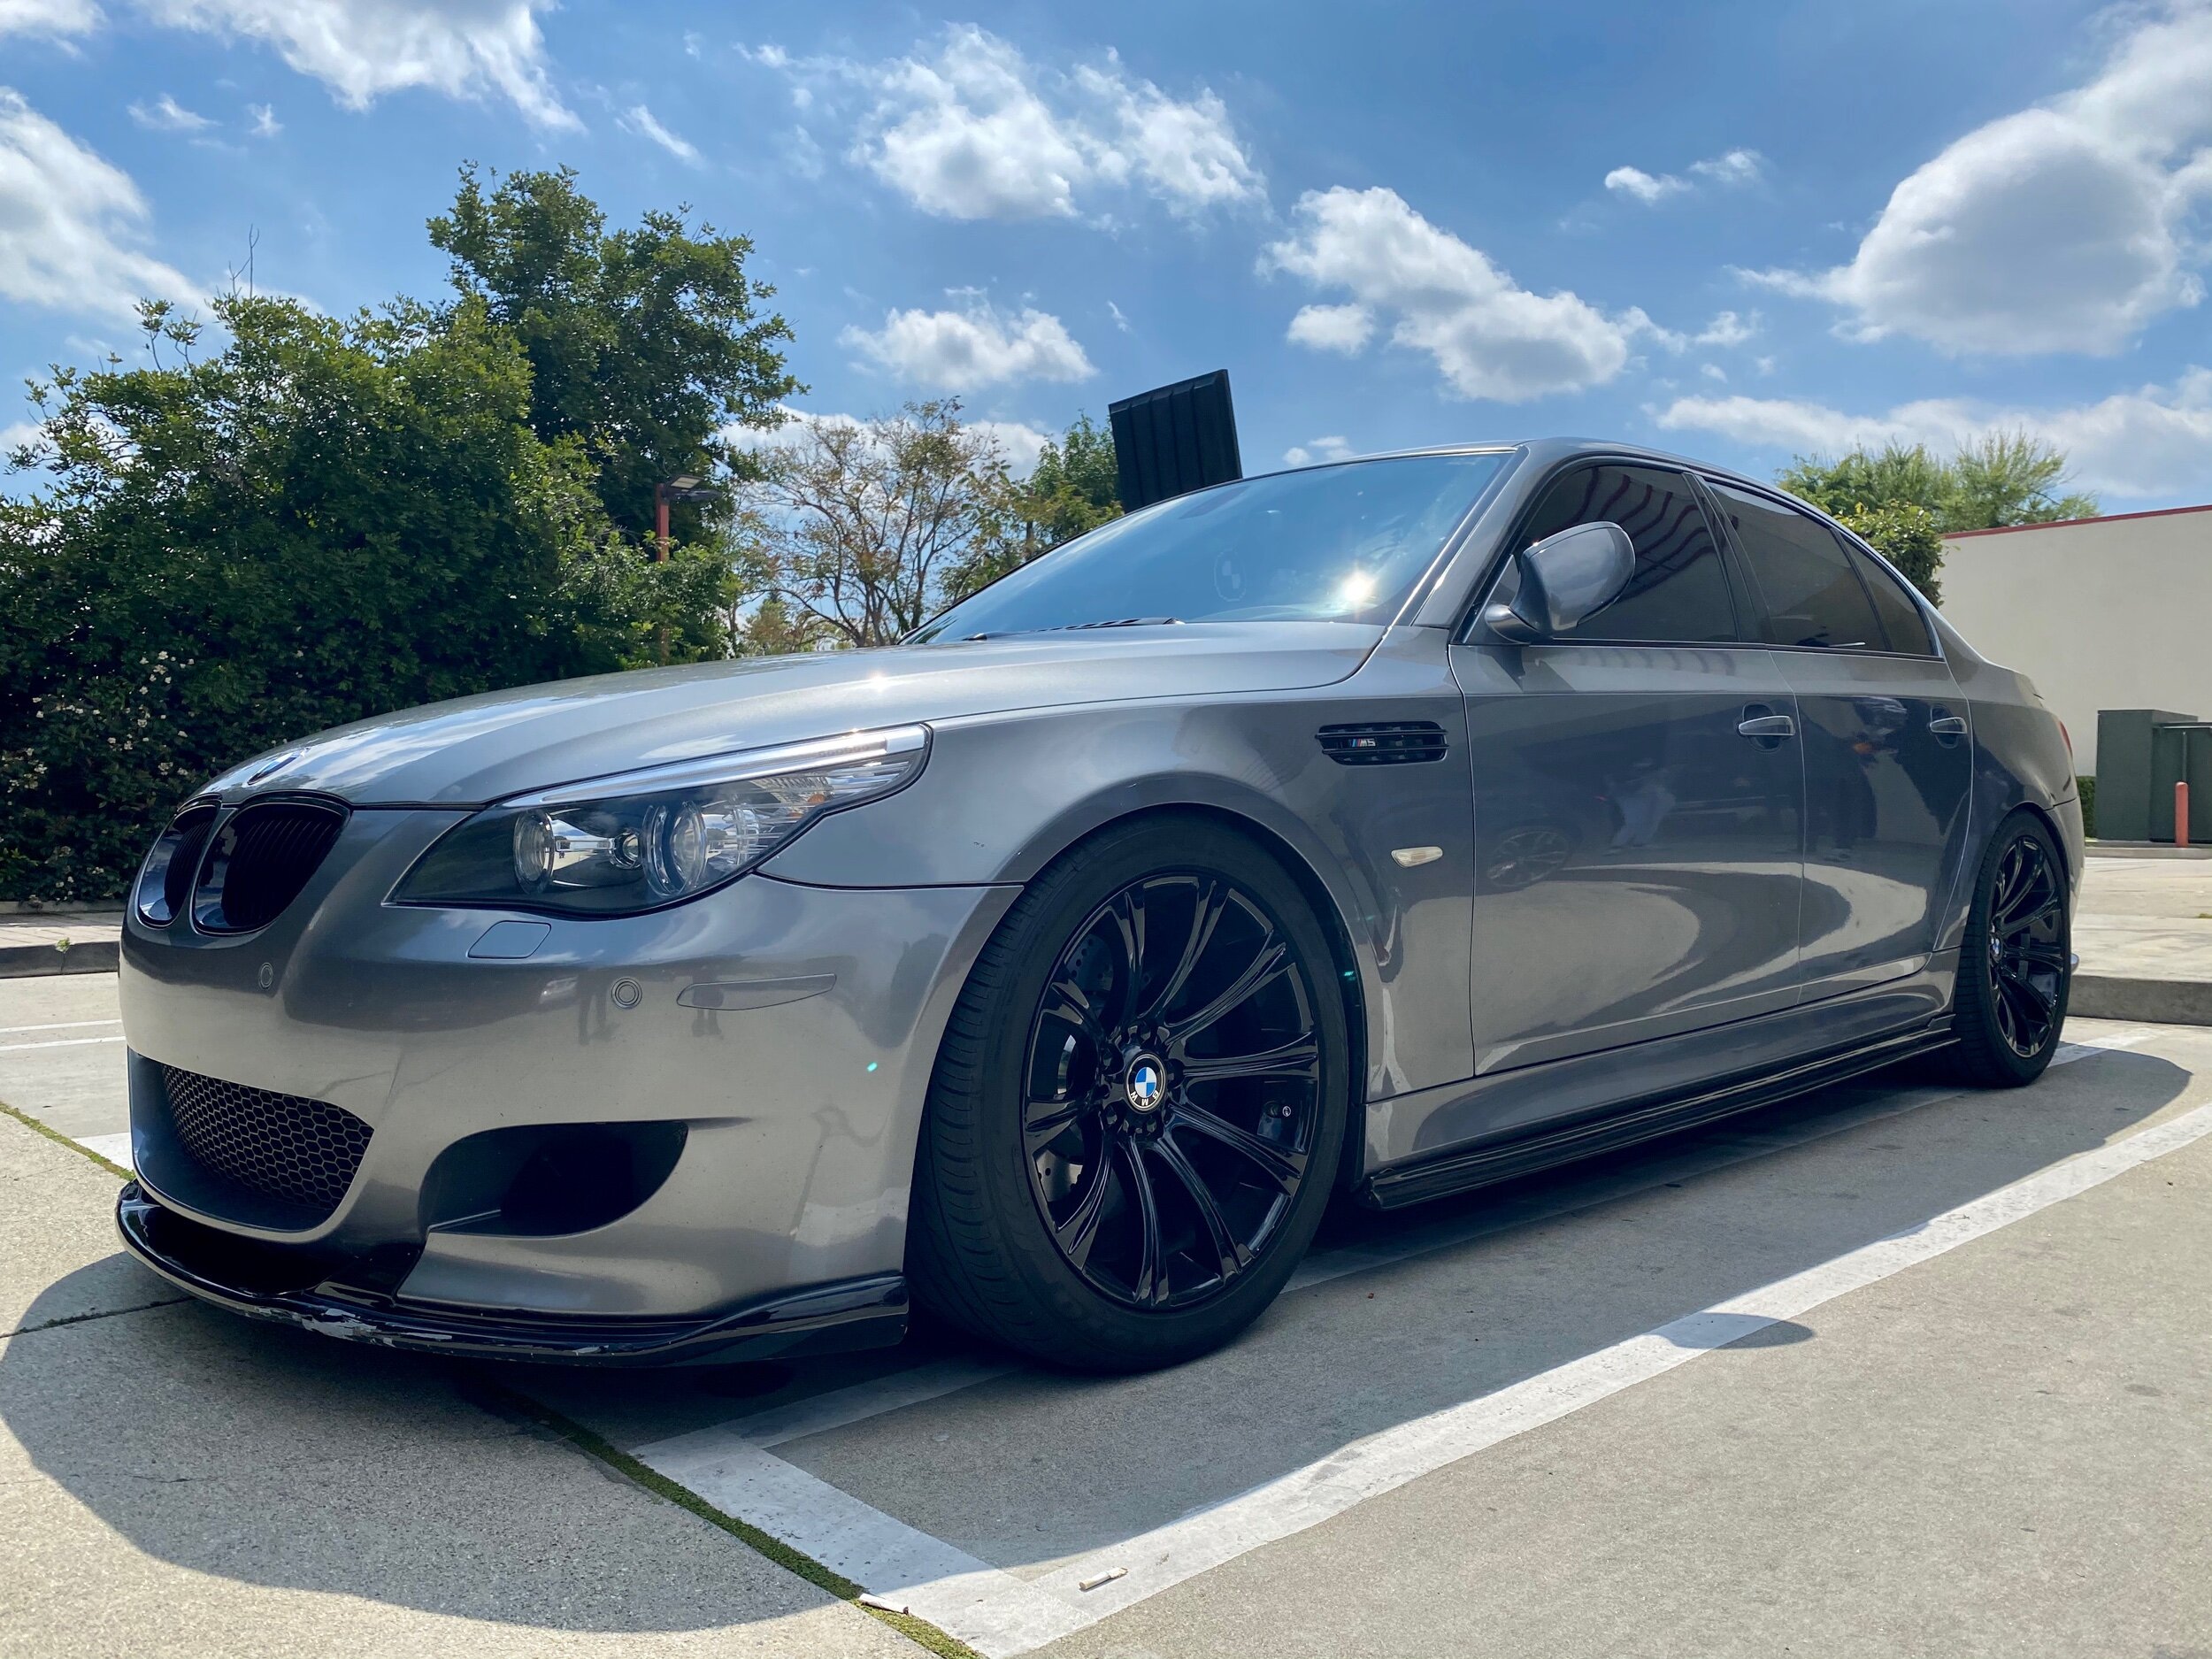 BTG713~N - BMW E60 M5 on Avant Garde Wheels SR10 finished with Gloss Black  centers with Carbon Fiber lip and Candy Red hardware.